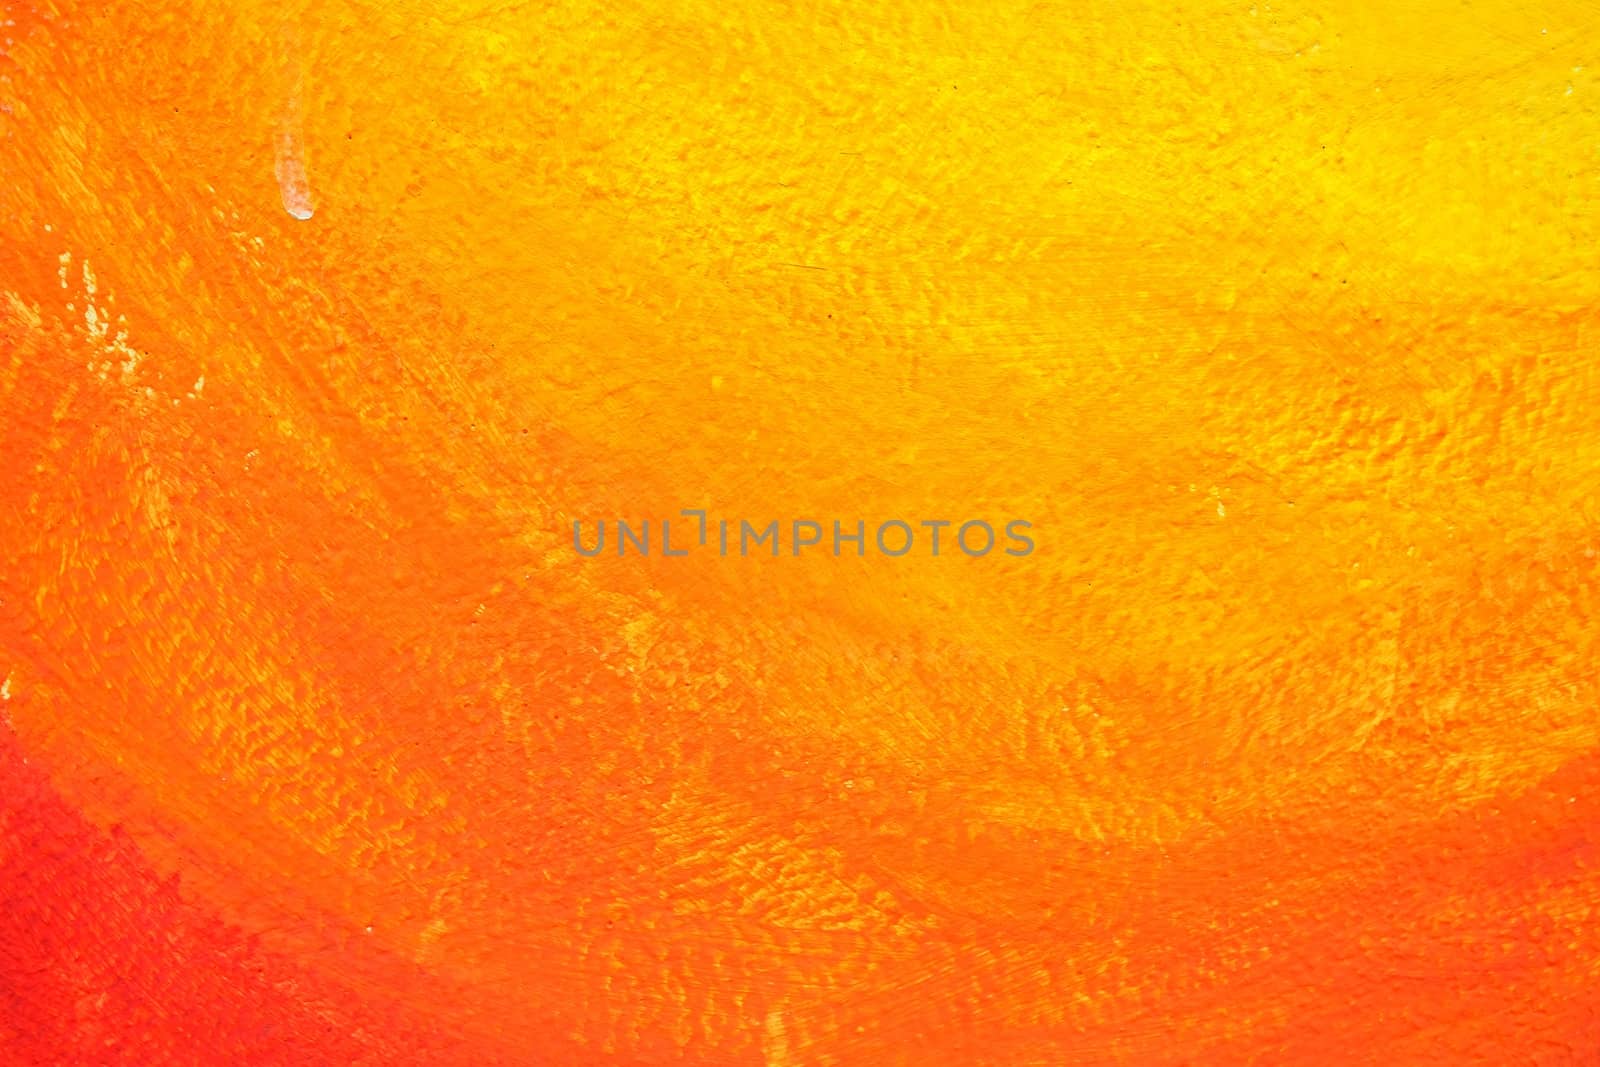 Unfinished Orange Painting on Concrete Background. by mesamong